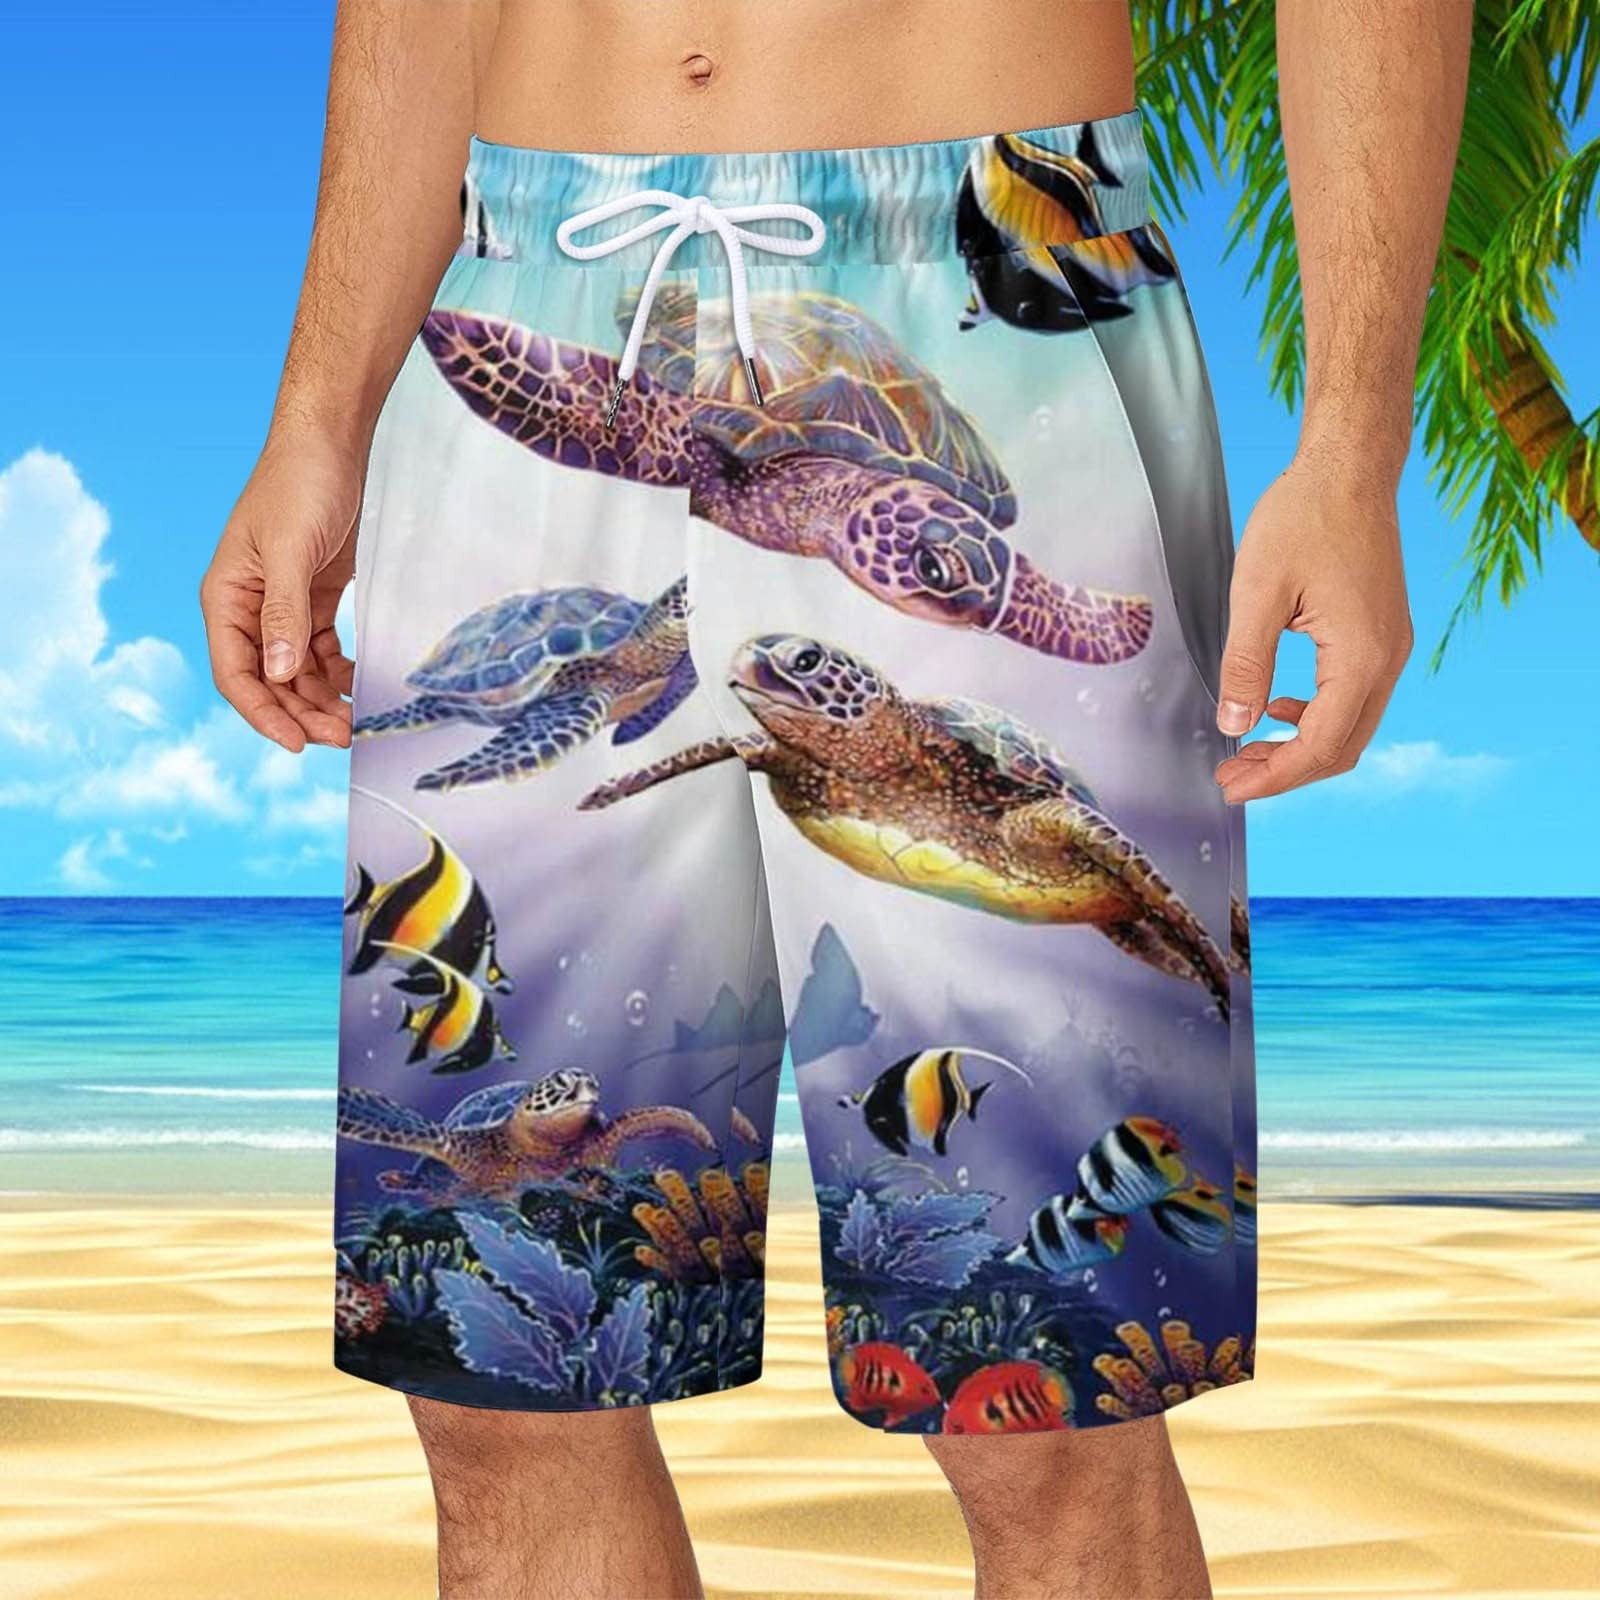 Hot6sl Beach Shorts for Men, Shorts Men Men's Swim Trunks Beach Board  Shorts Quick Dry Bathing Suits Holiday Shorts with Pockets Under 1 Dollar  Items Only Light Blue XL 